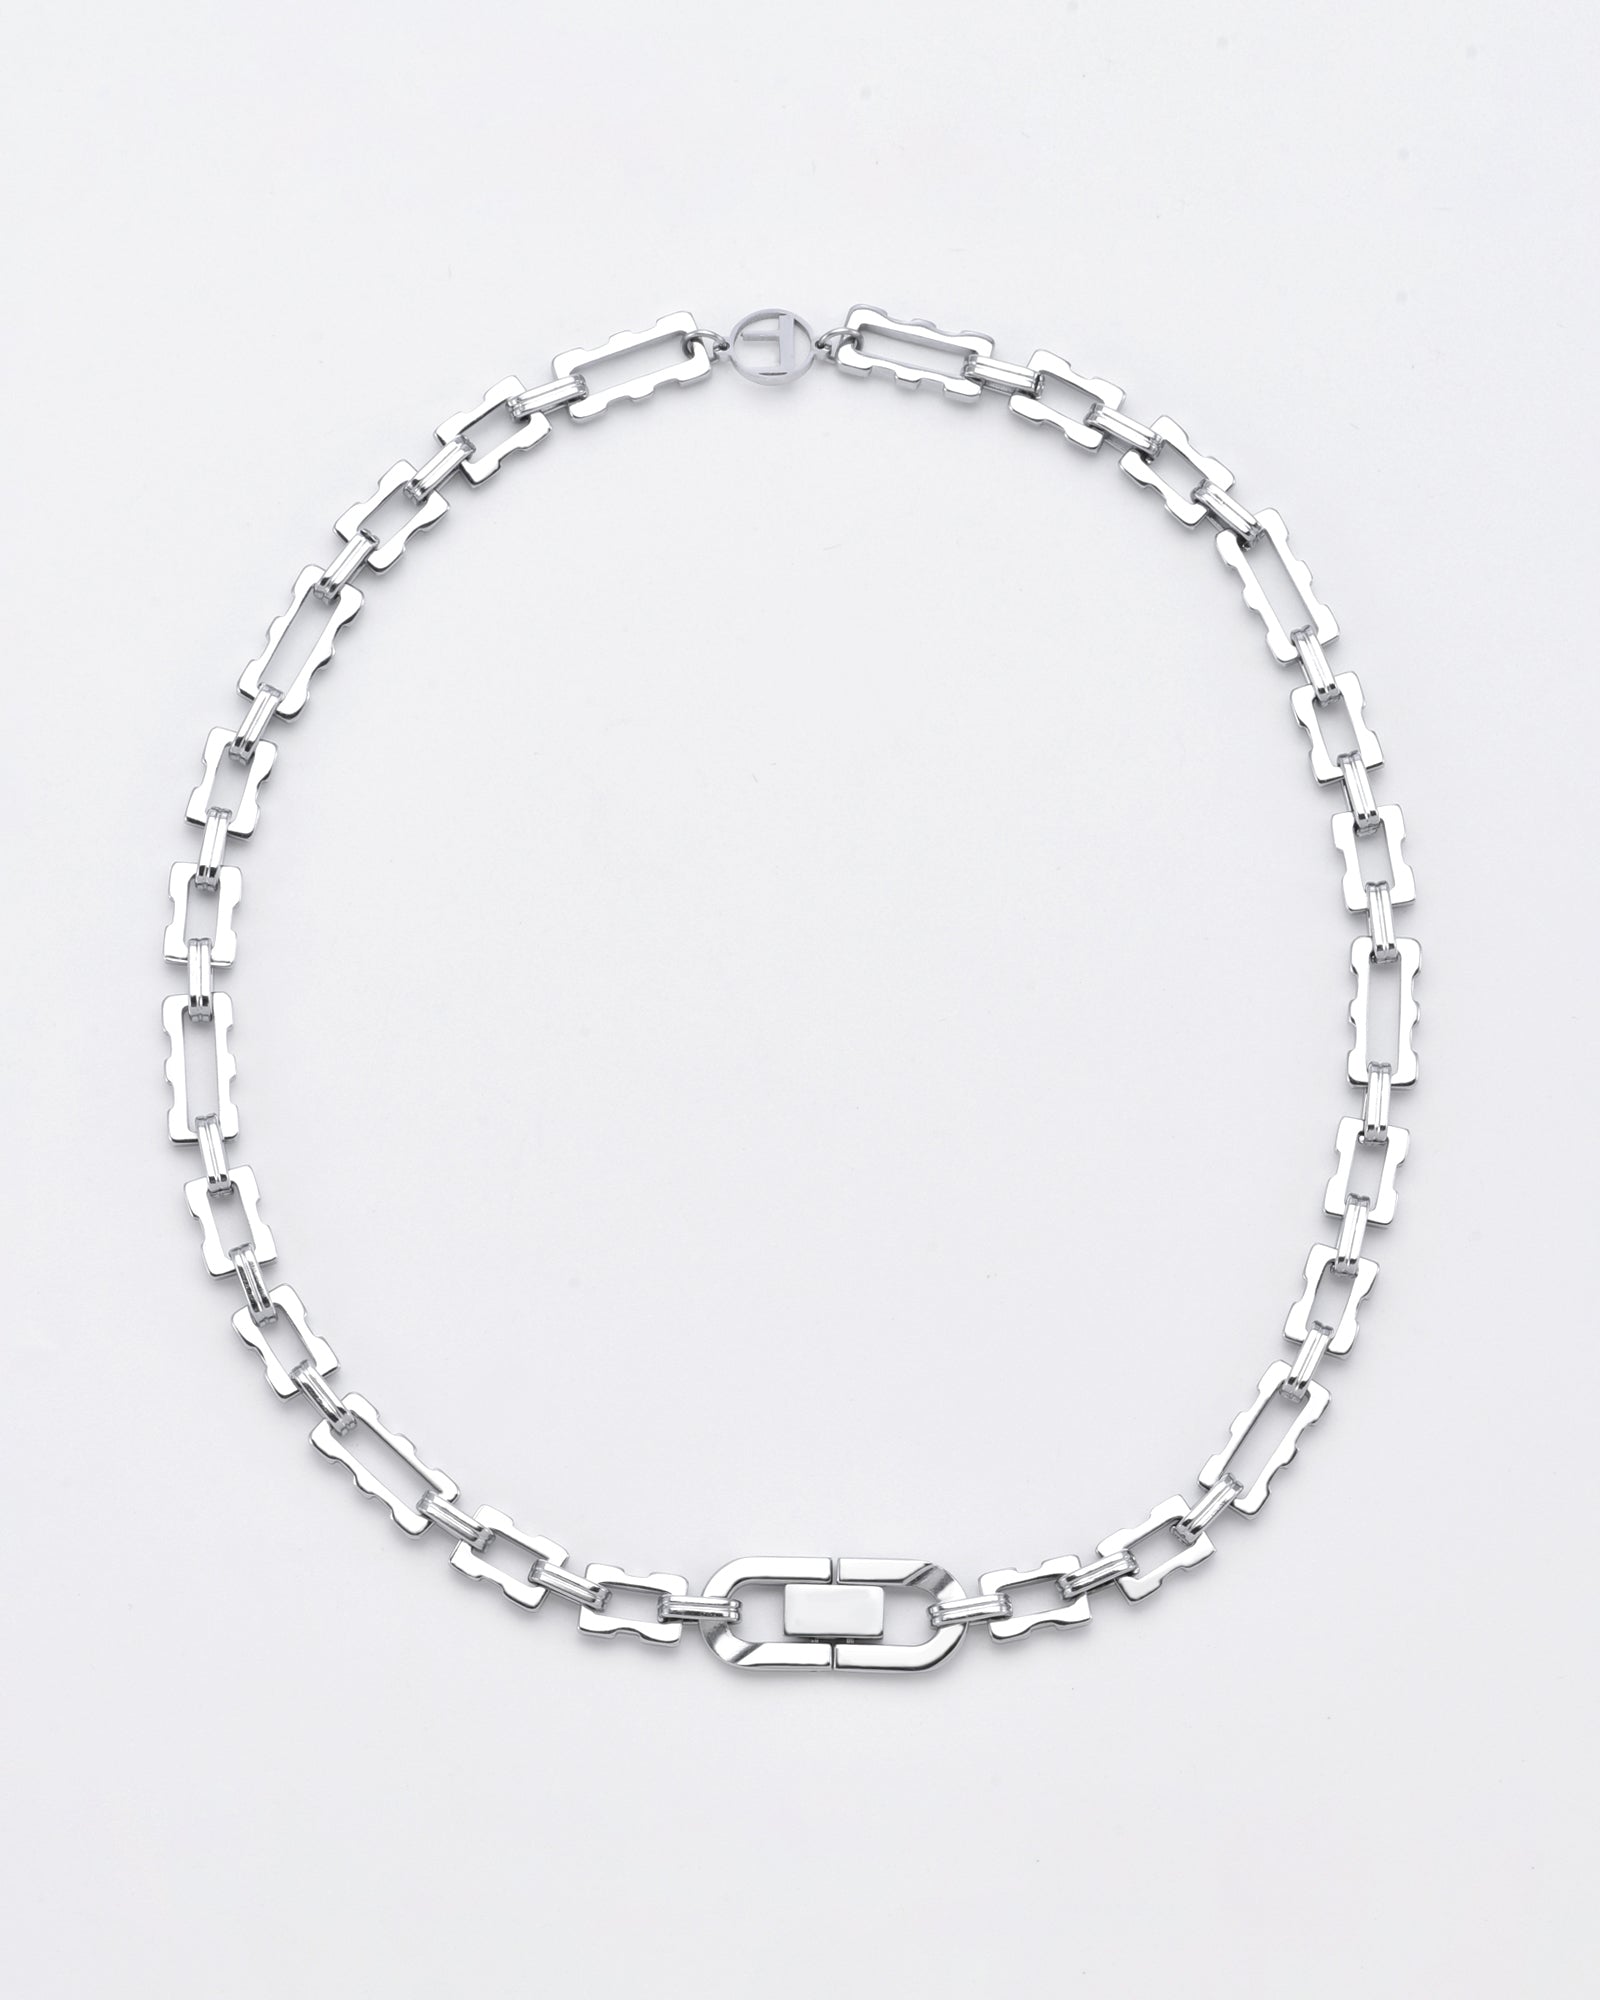 A silver Links Necklace Silver from For Art&#39;s Sake® with rectangular links arranged in a repeating pattern. The necklace has a sleek and modern design, featuring a distinctive rectangular clasp at the front. The background is plain white, highlighting the necklace&#39;s 24k gold-plated polished finish.